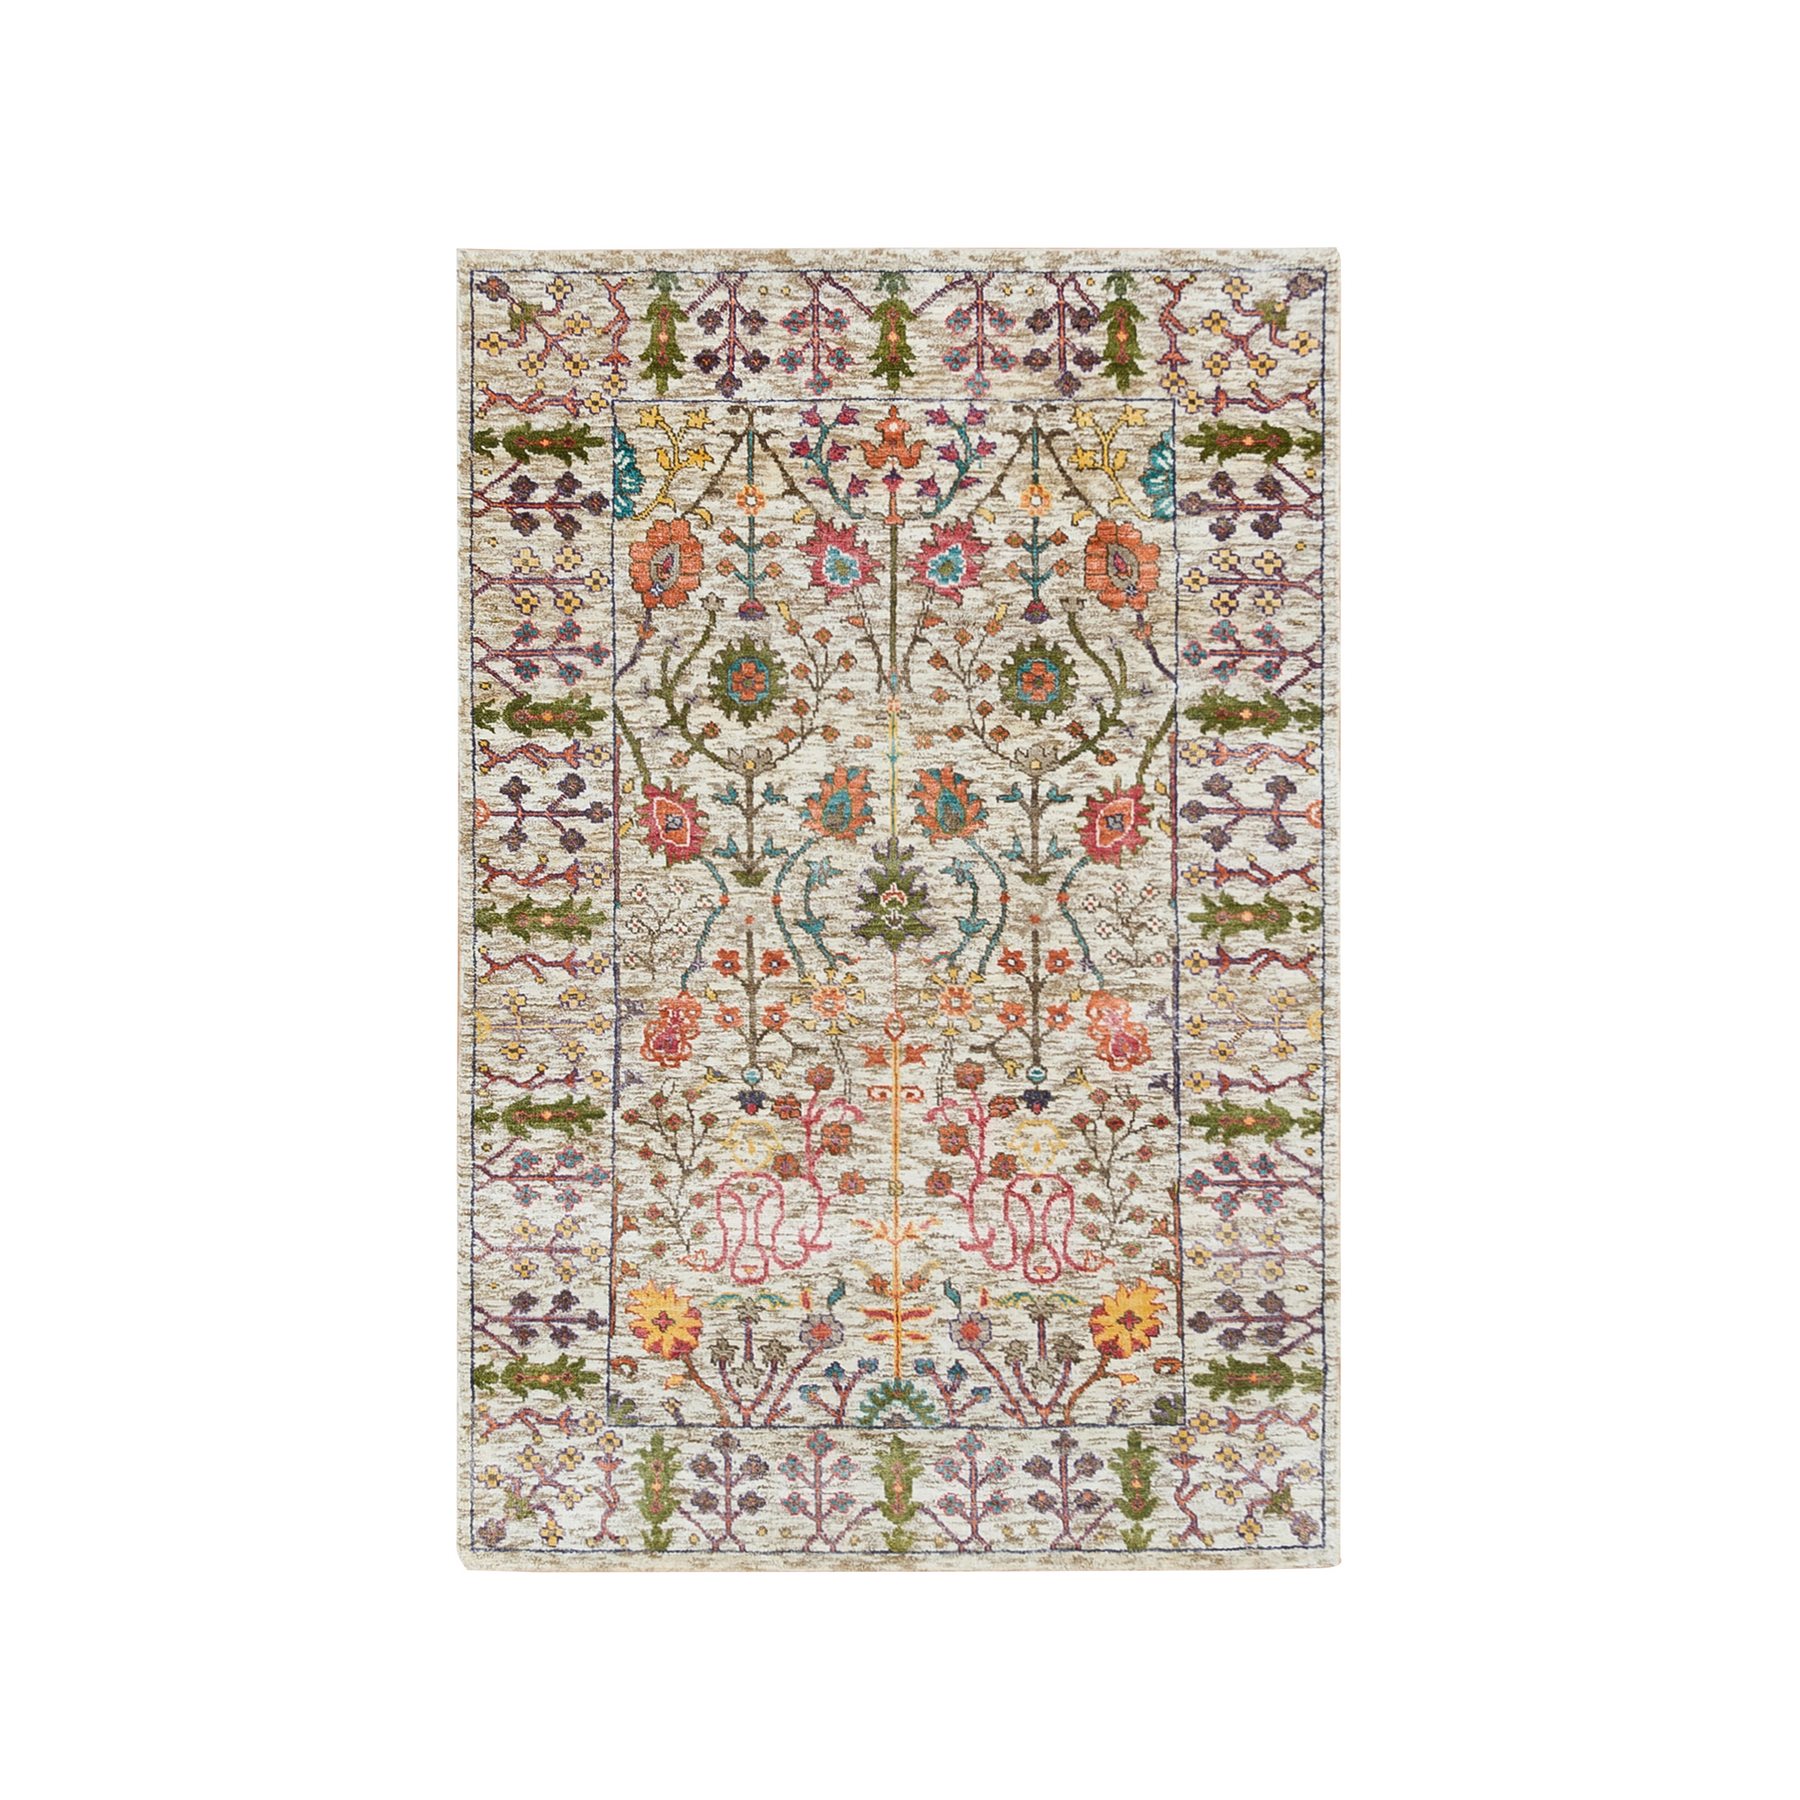  Silk Hand-Knotted Area Rug 3'2